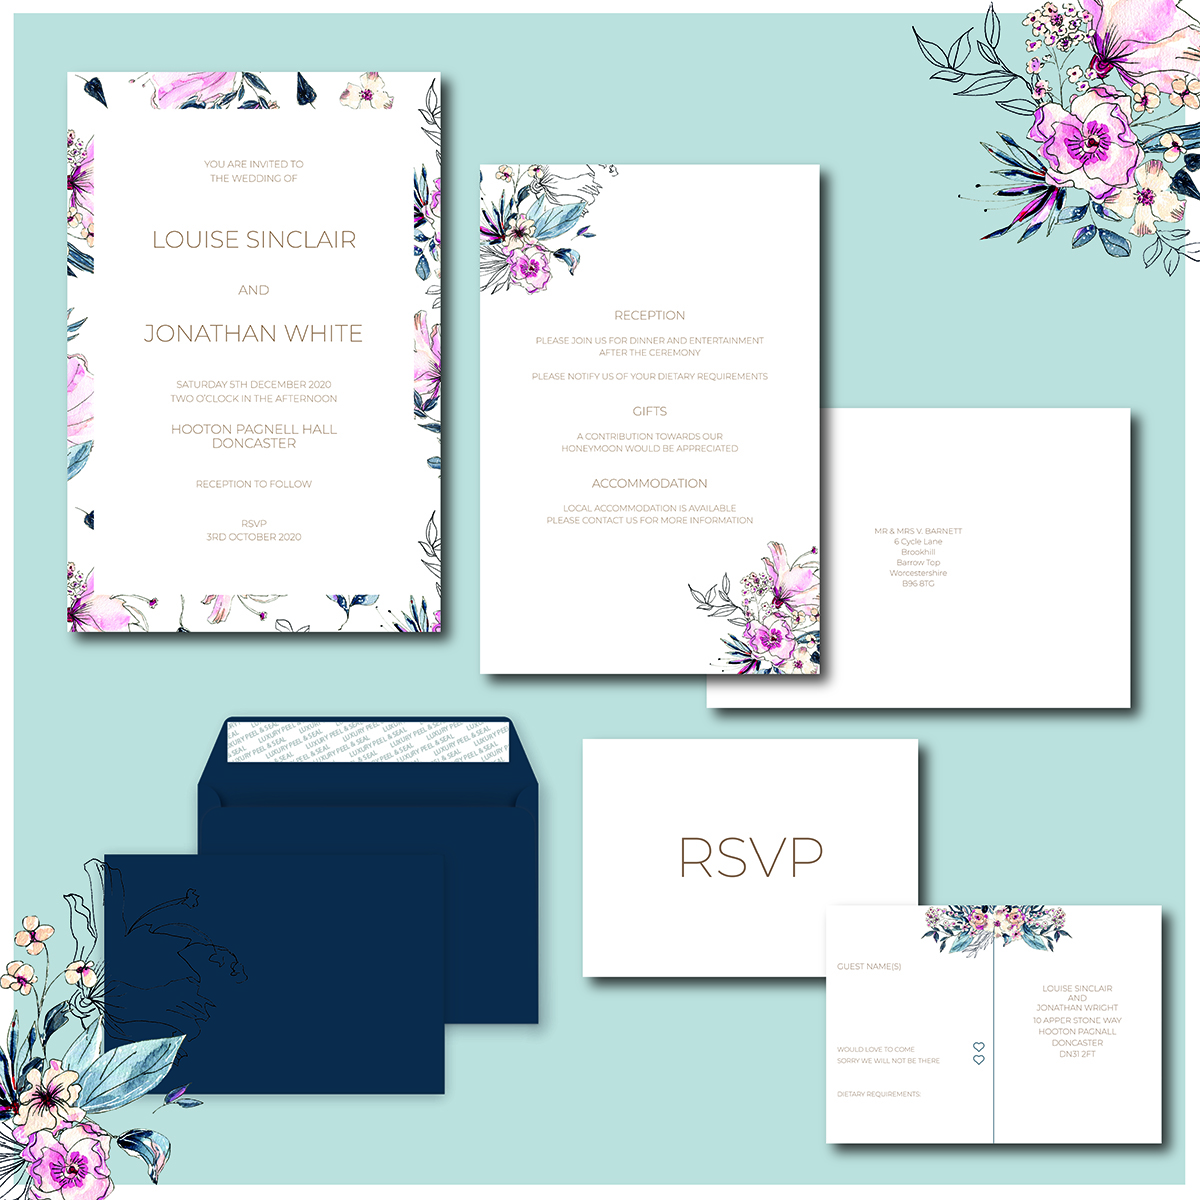 Wedding Stationery - Navy Sketch | Wedding Photographer and Wedding Stationery Designer in North Lincolnshire and UK gallery image 1